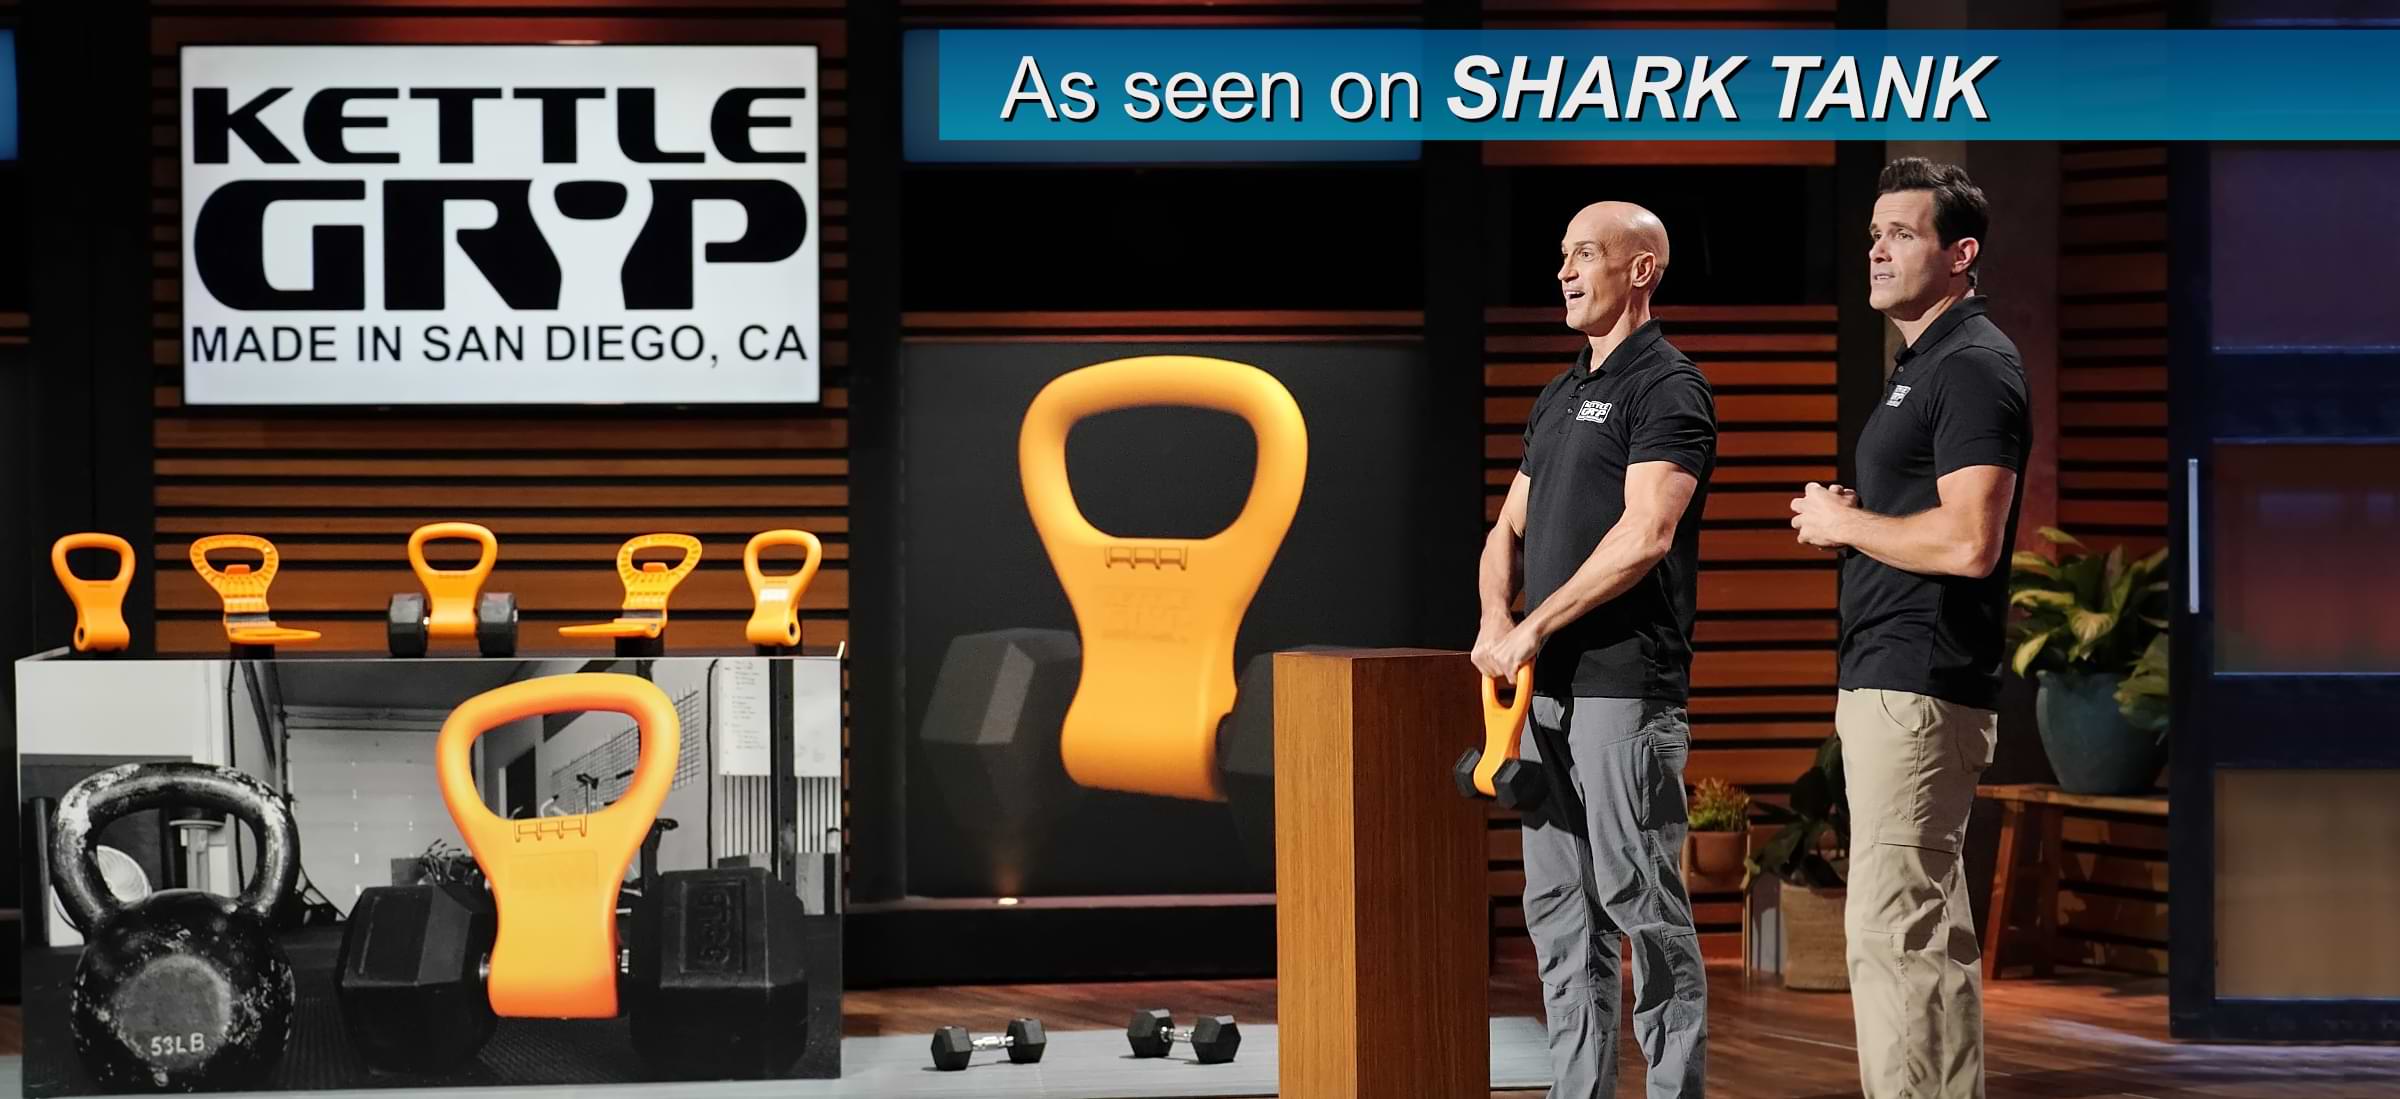 Kettle Gryp as seen on Shark Tank with Dan and Andy